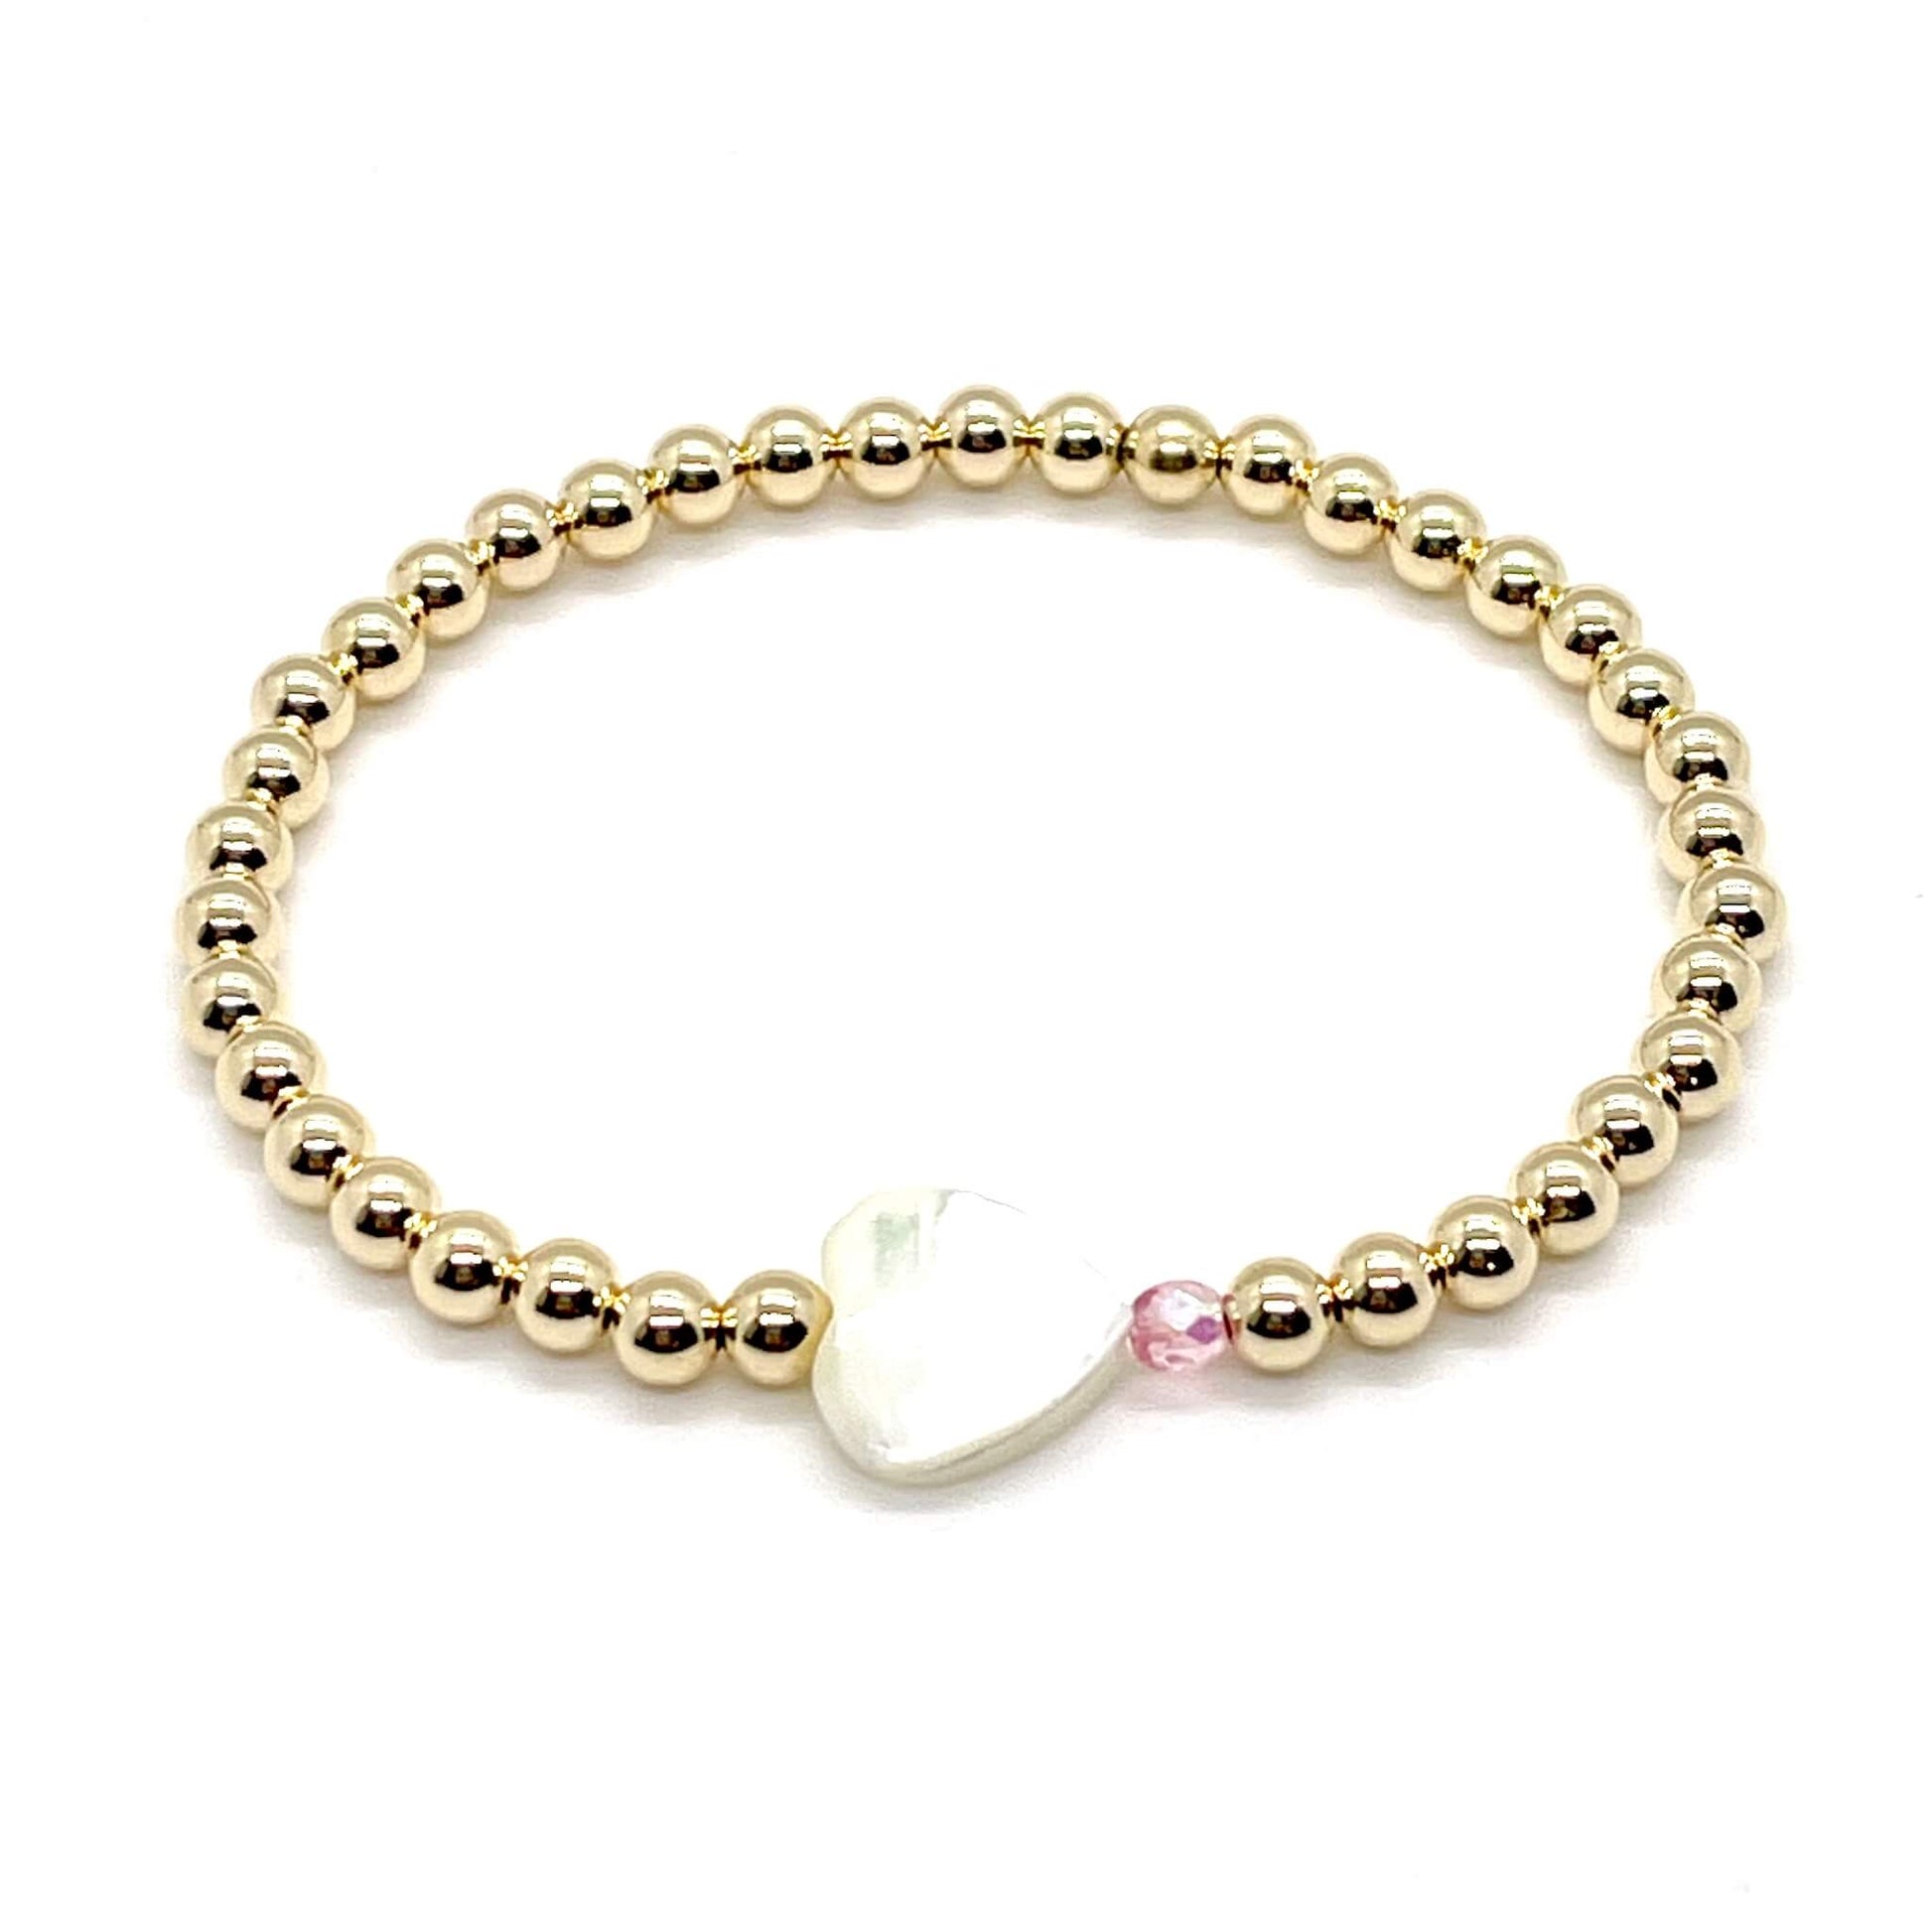 Gold heart bracelet with a mother-of-pearl heart, a small faceted pink crystal, and 4mm 14K gold filled beads.